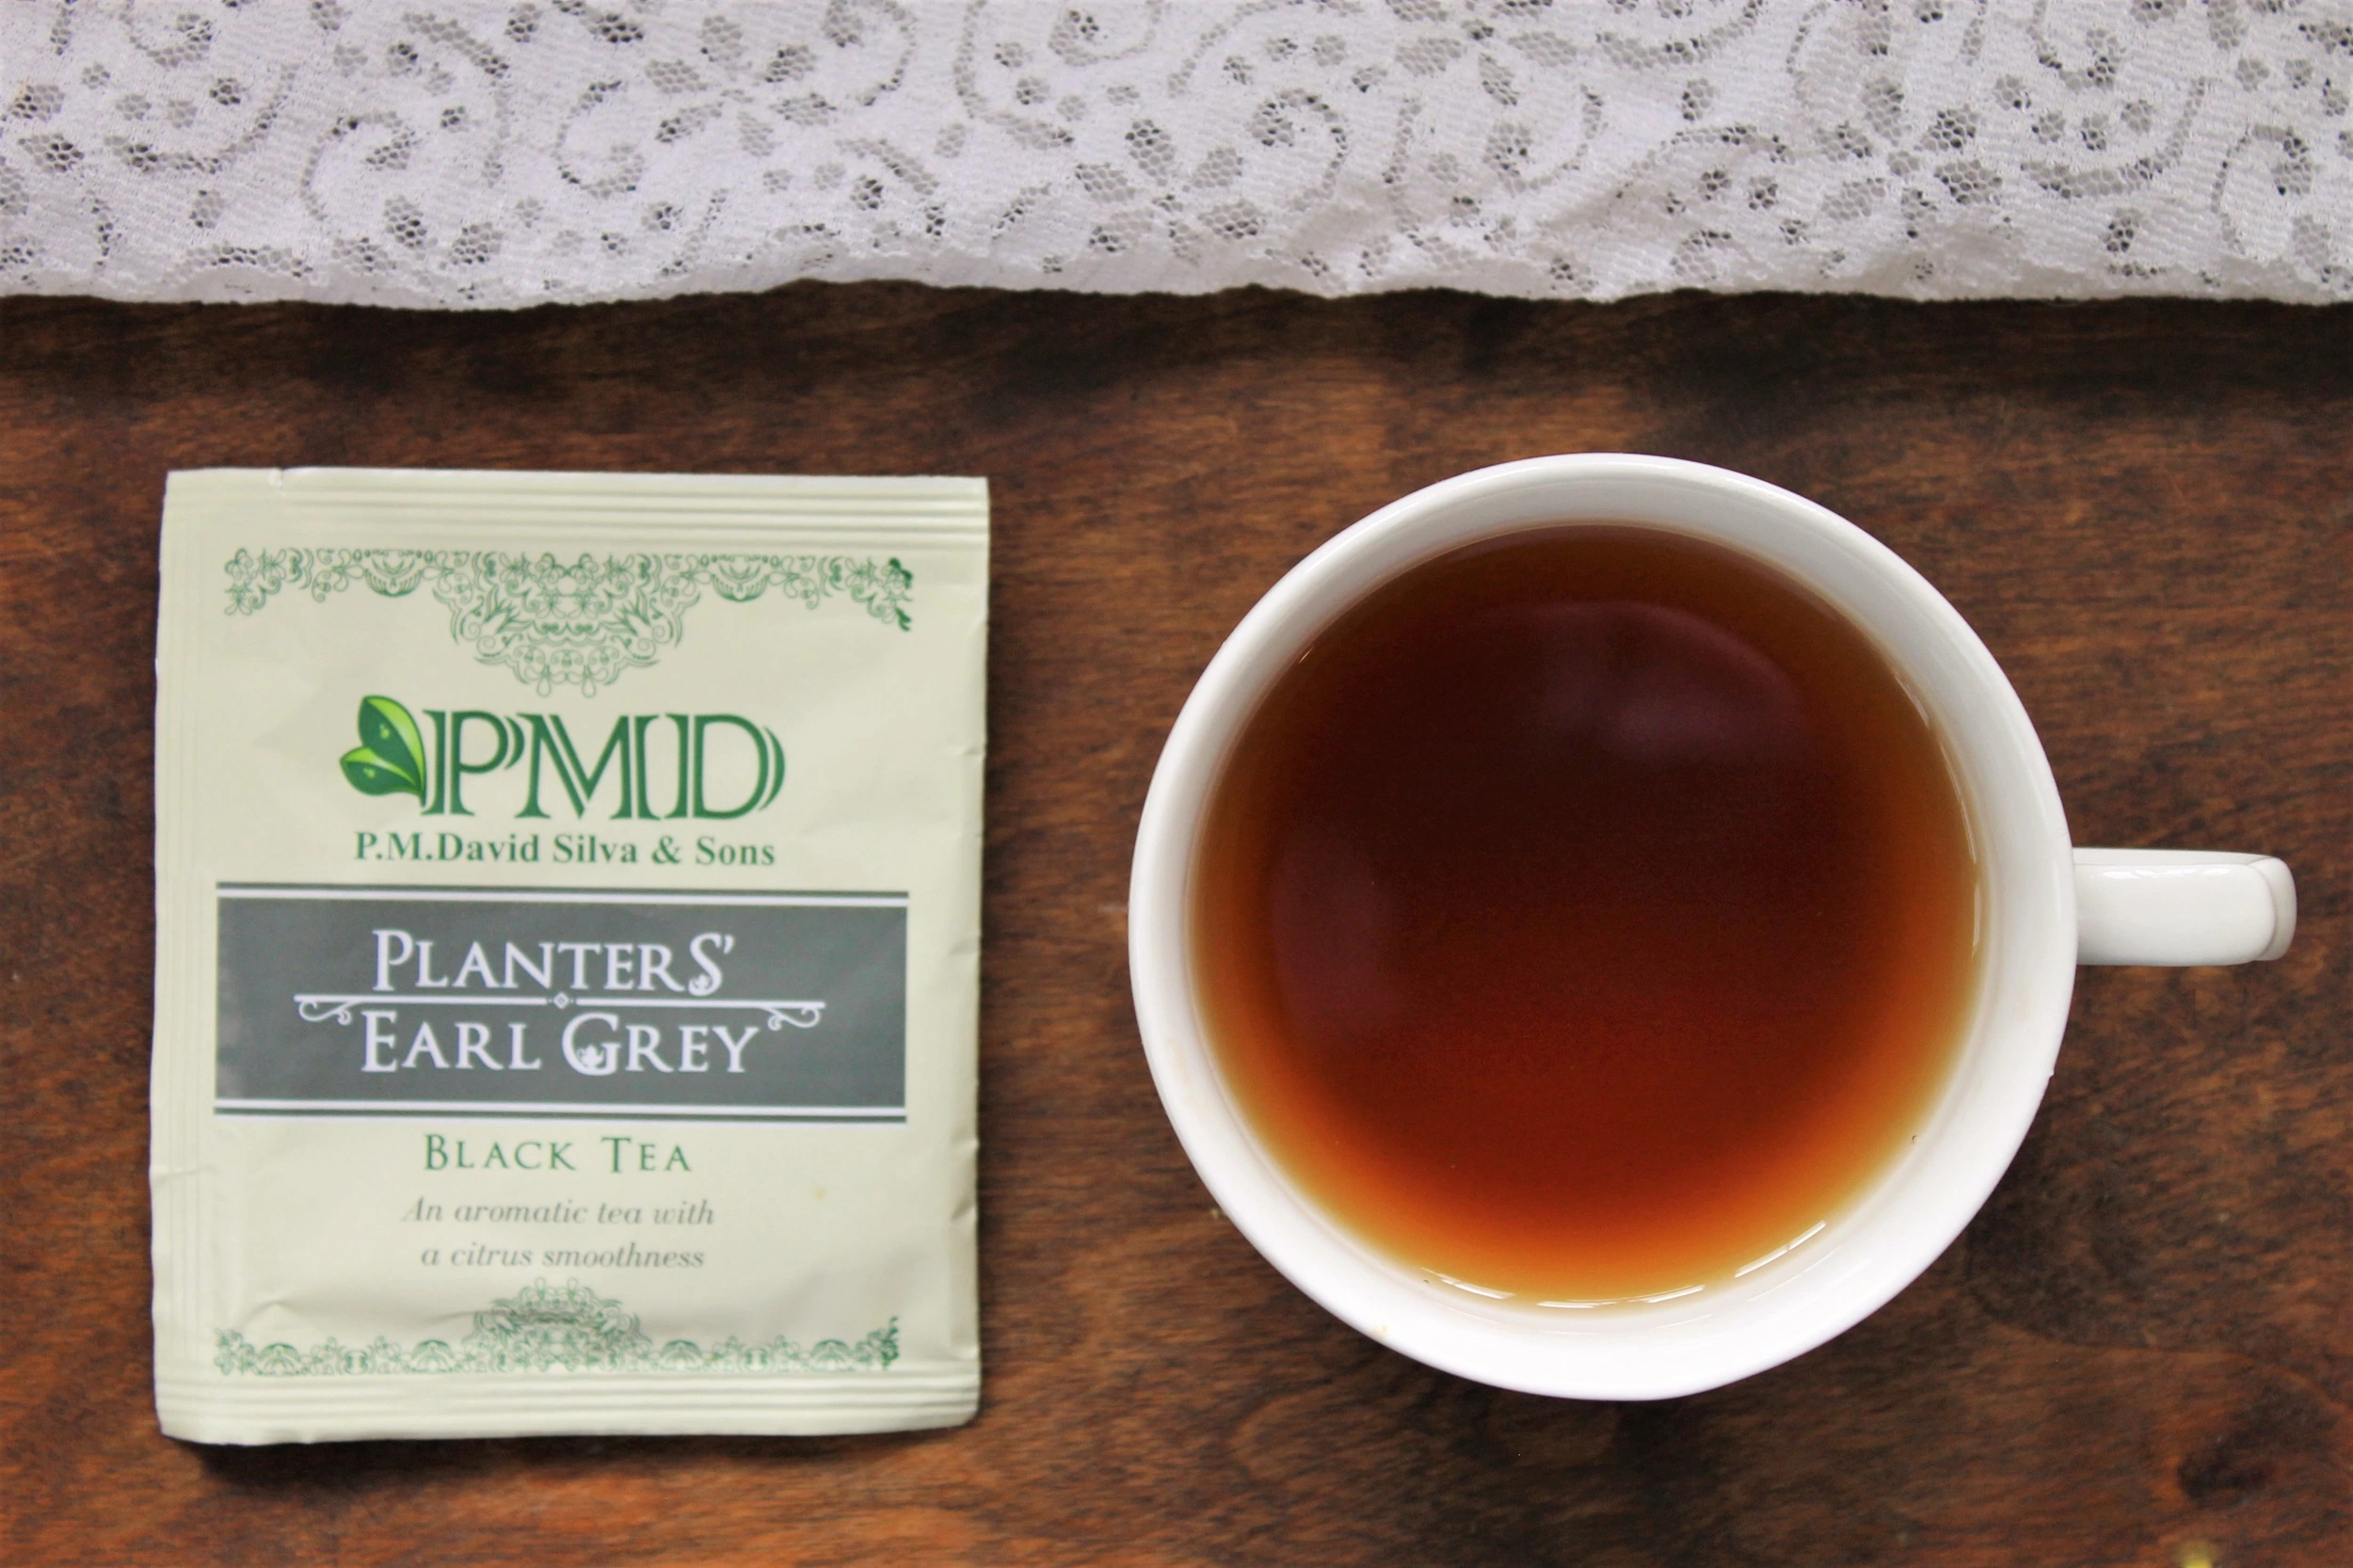 pmd planters' earl grey tea review